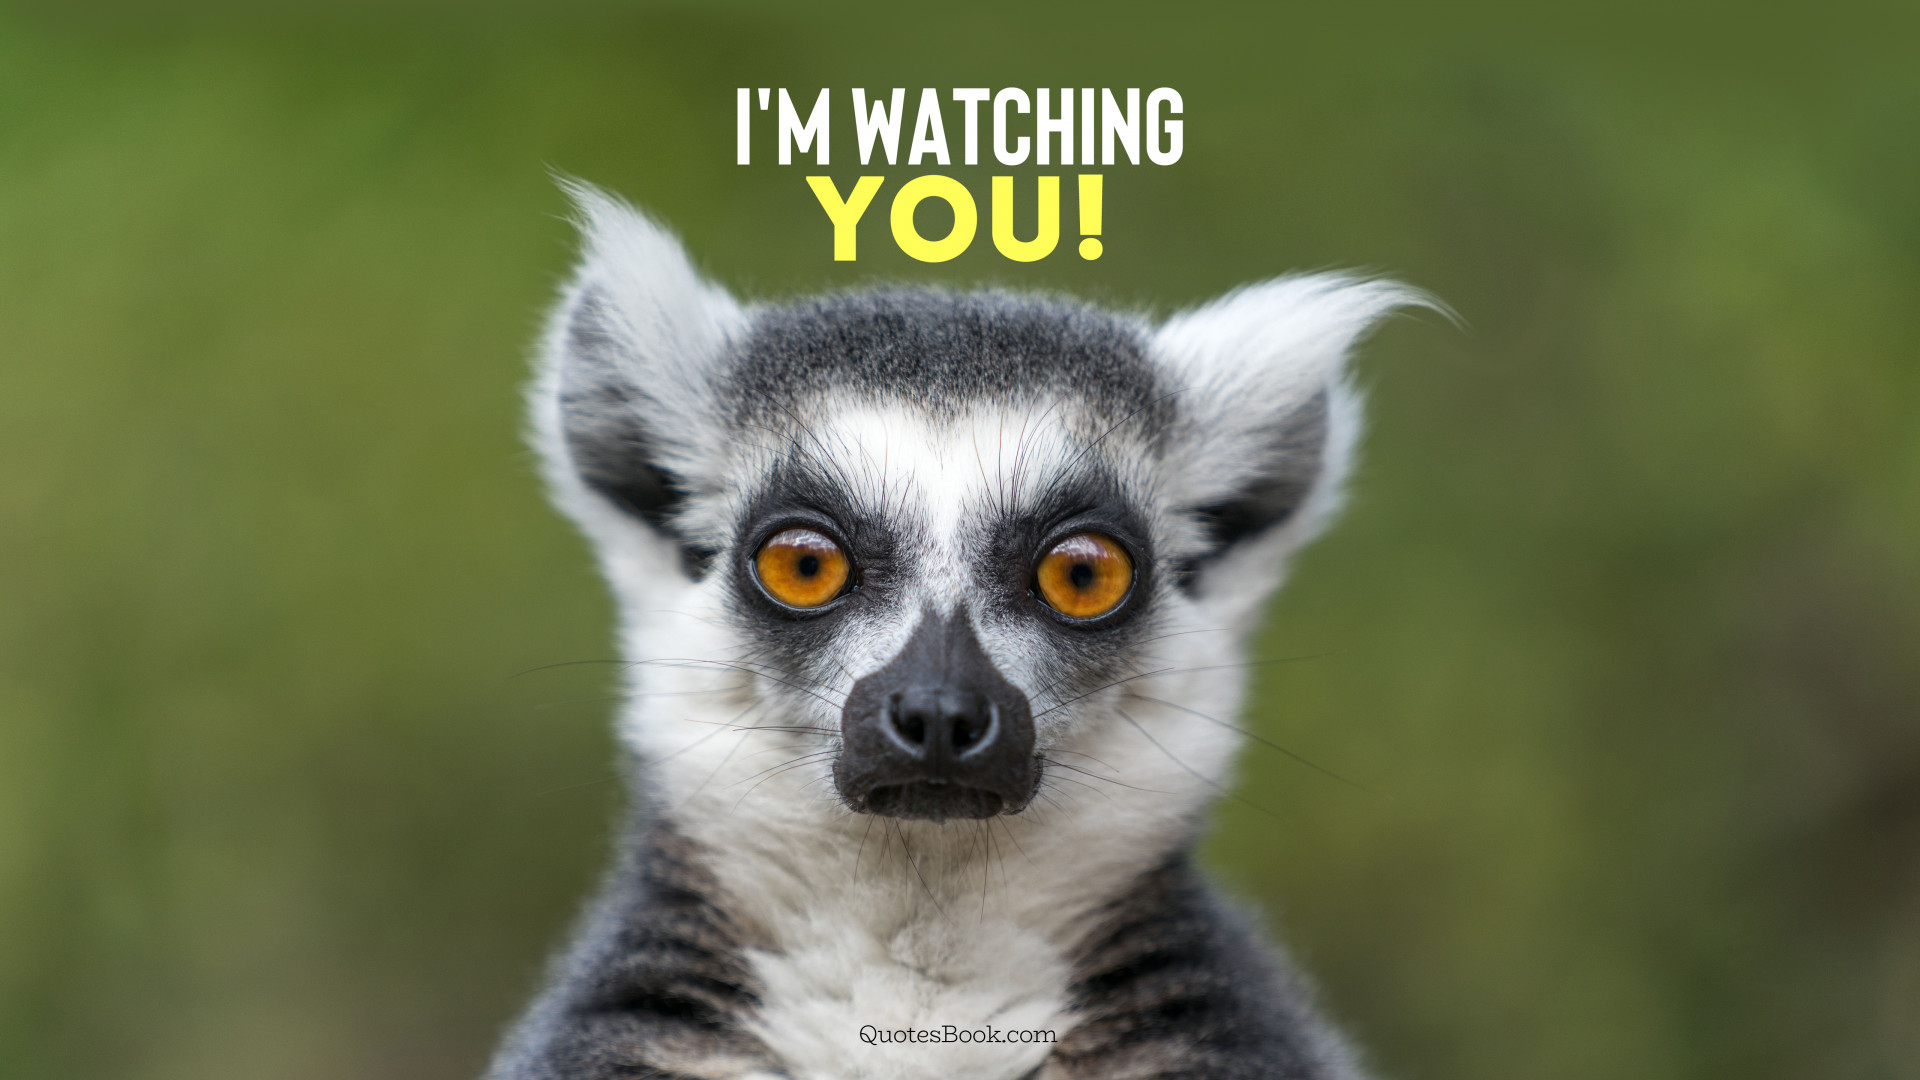 I'm watching you - QuotesBook